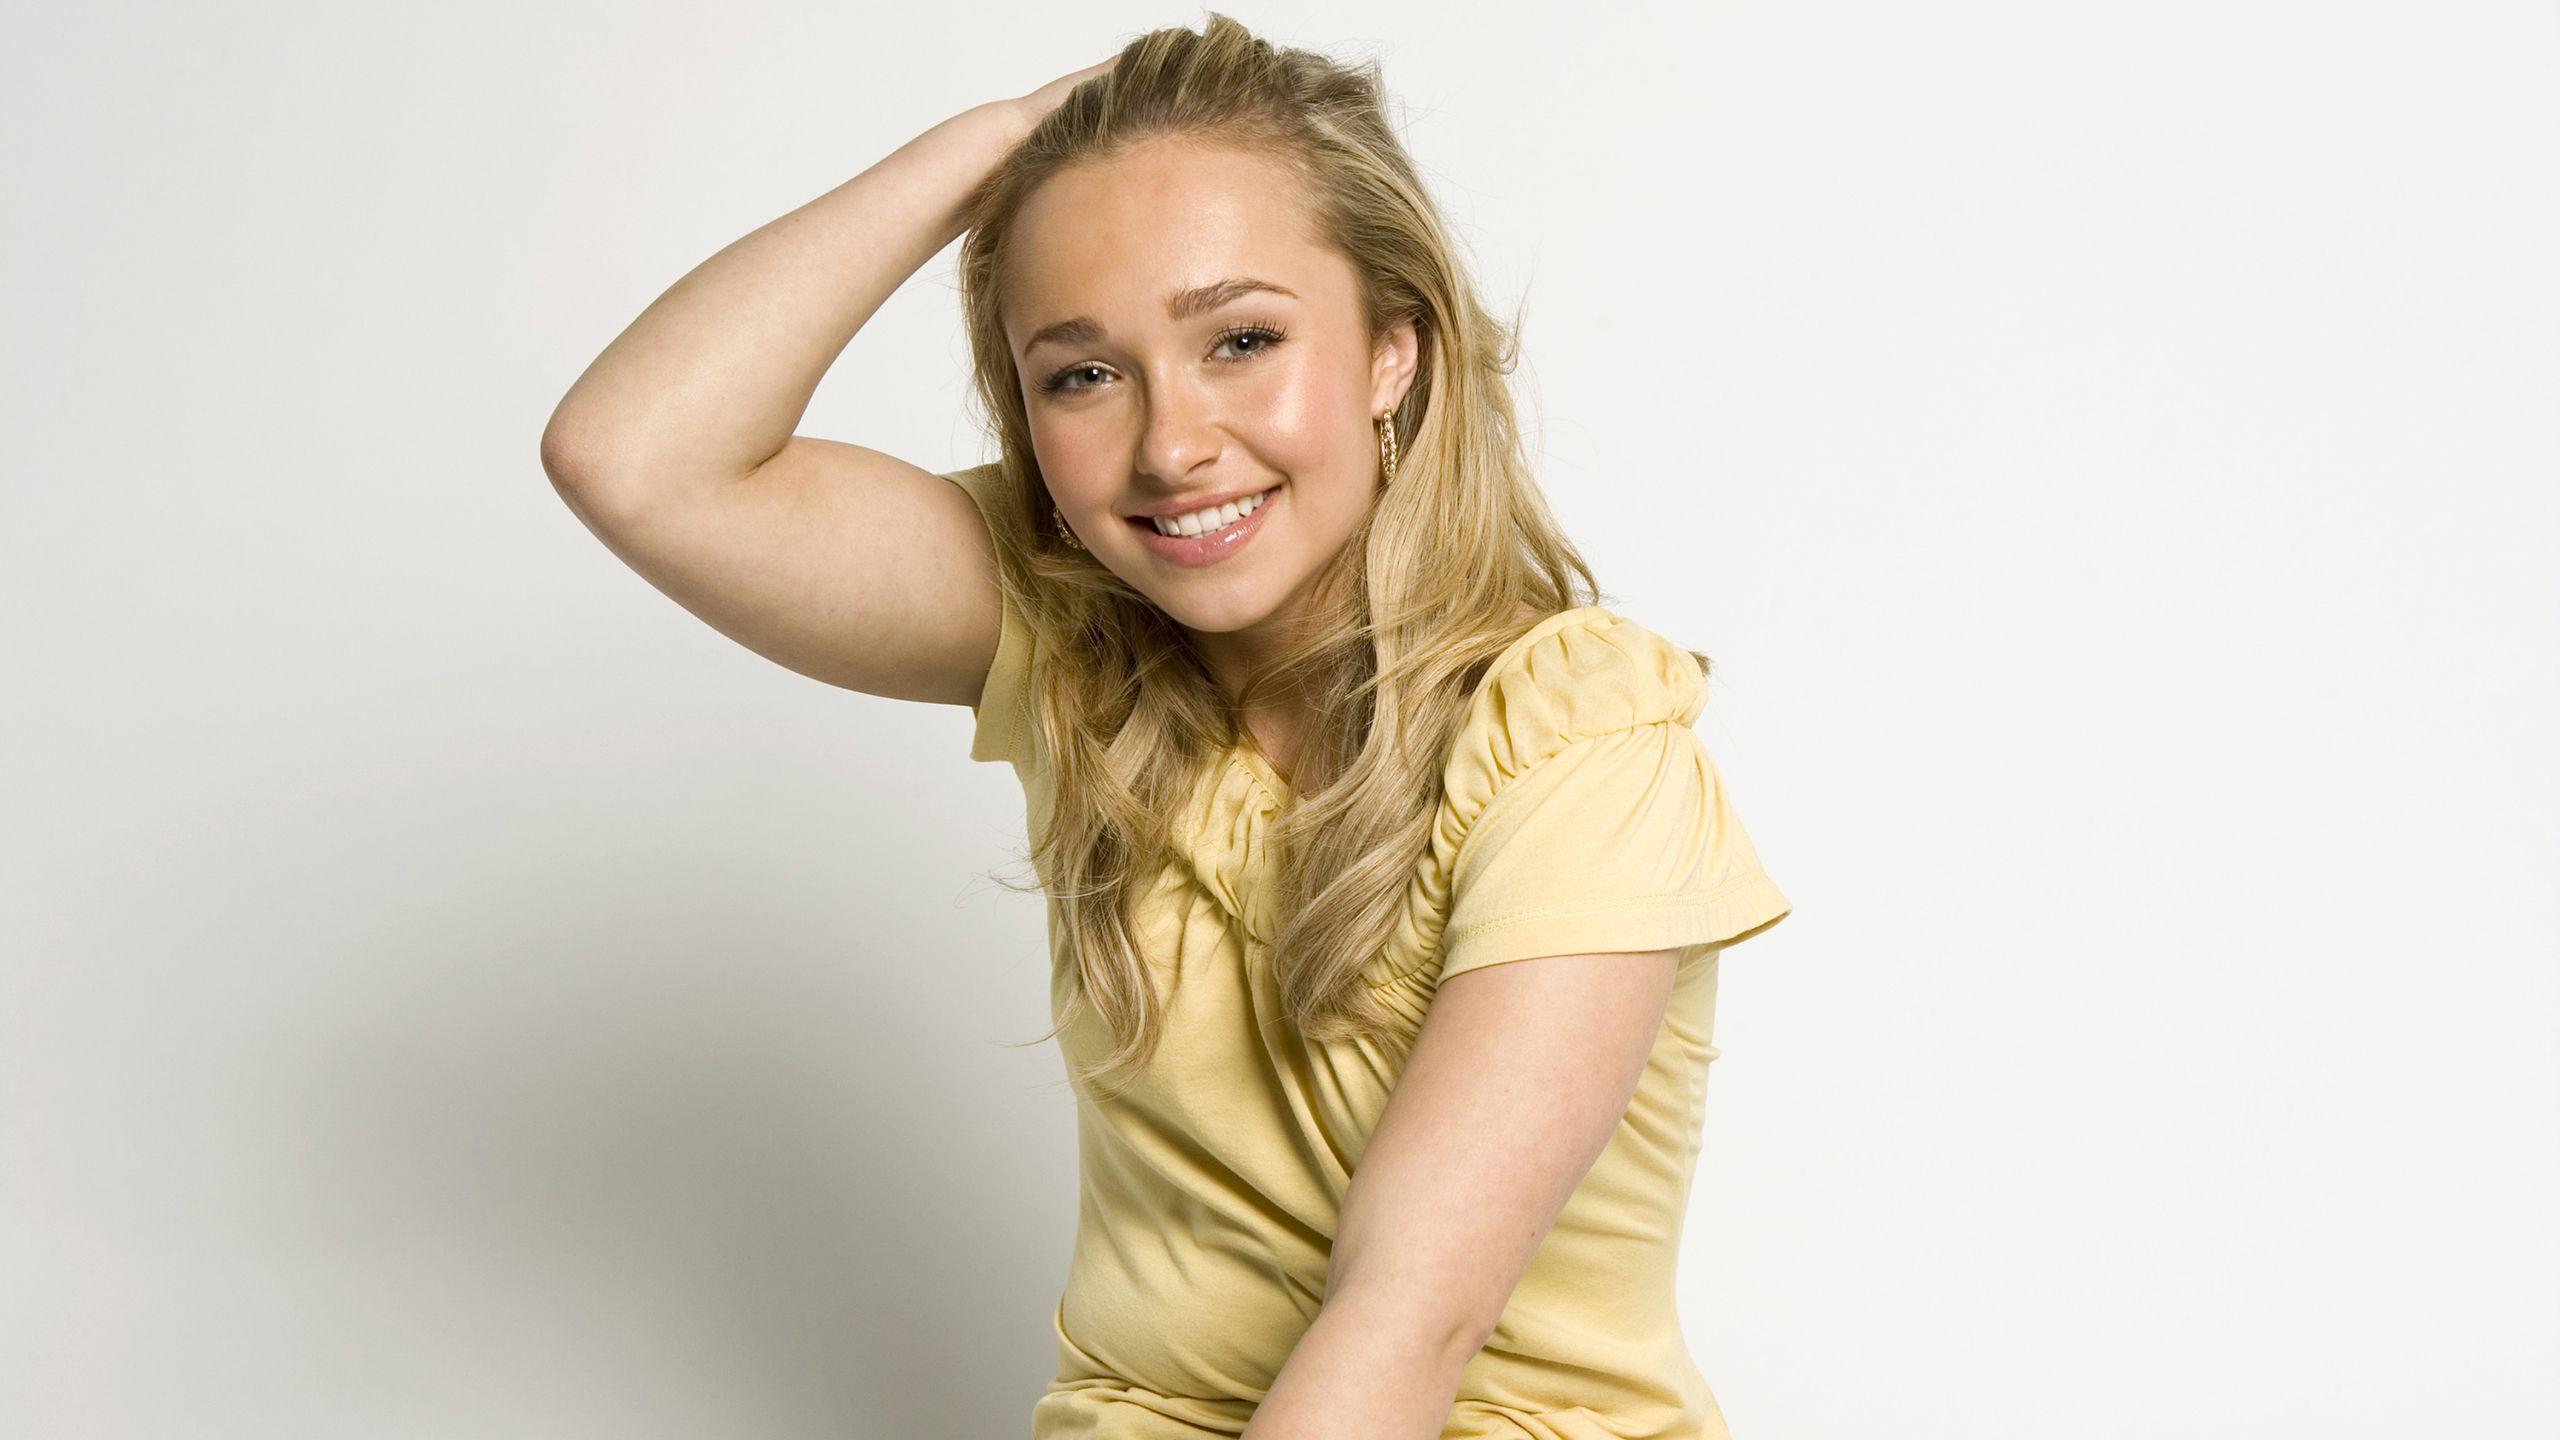 Hayden Panettiere Full HD Wallpaper and Background Imagex1440